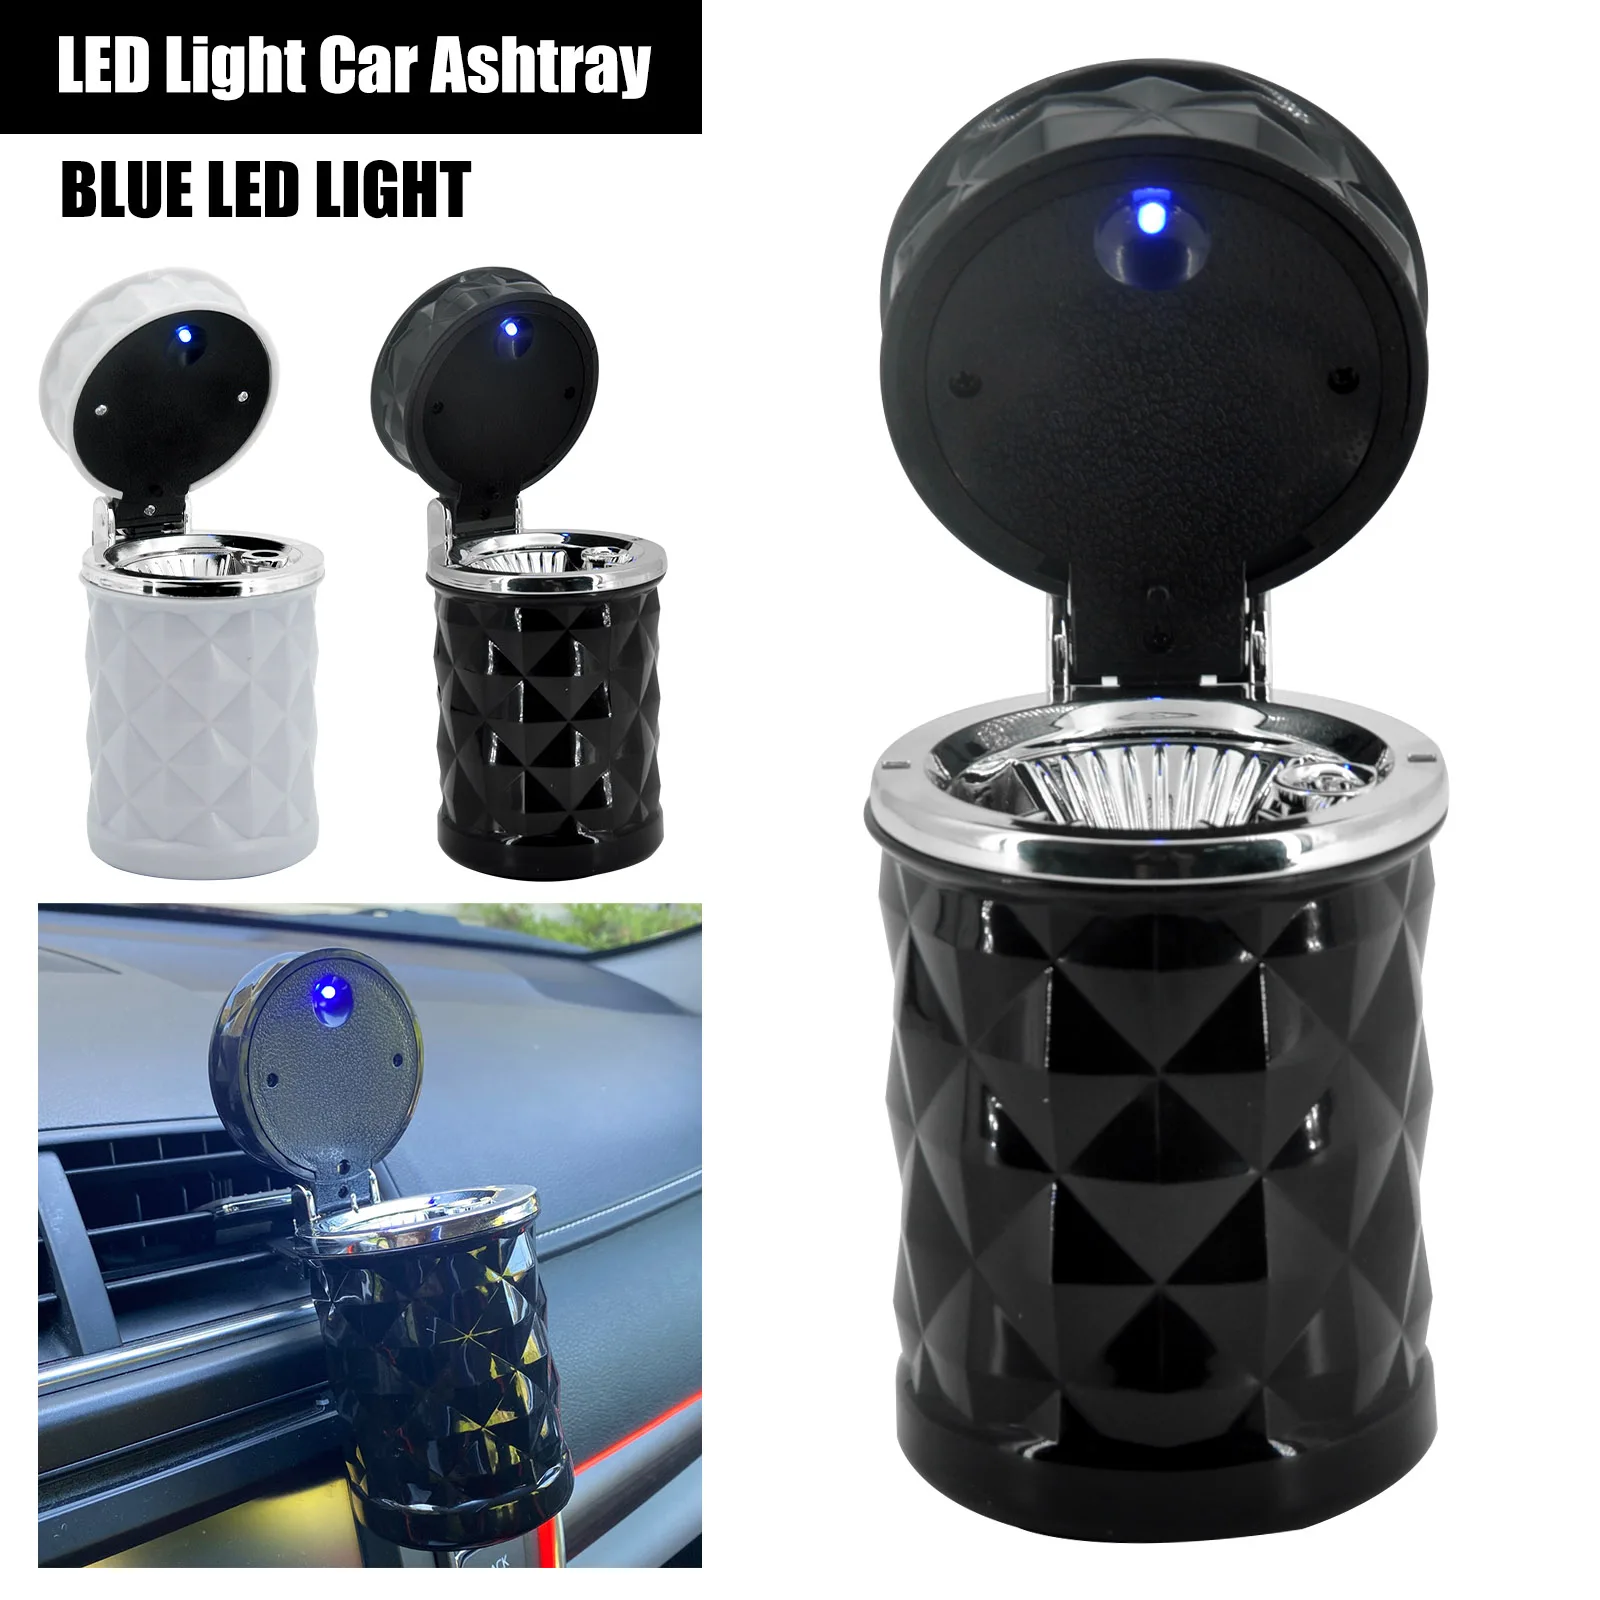 2021 Car Accessories Portable LED Light Car Ashtray Universal Cigarette Cylinder Holder Car Styling